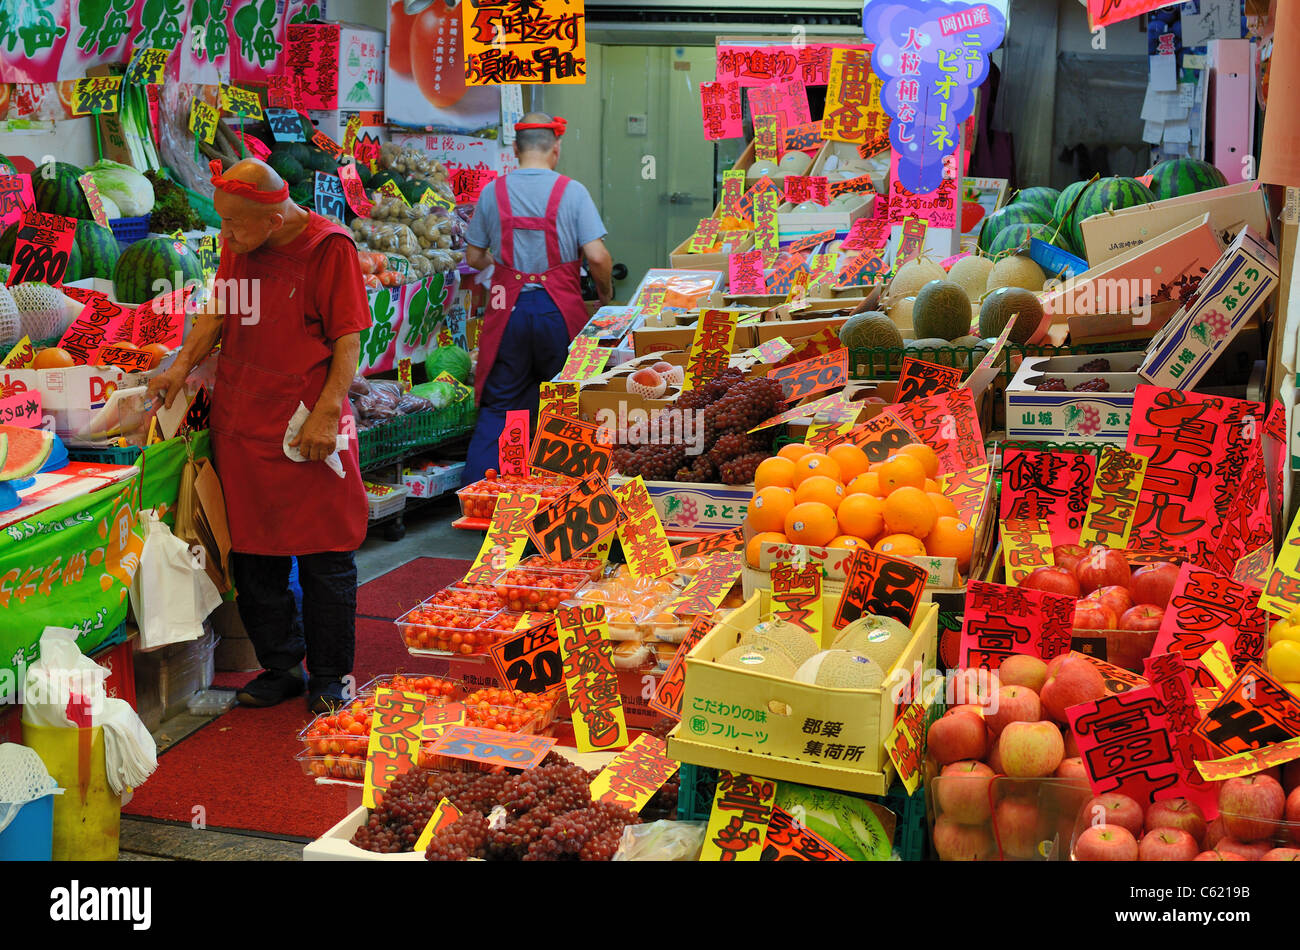 Fruit and produce at a market in Kyoto, Japan. Stock Photo